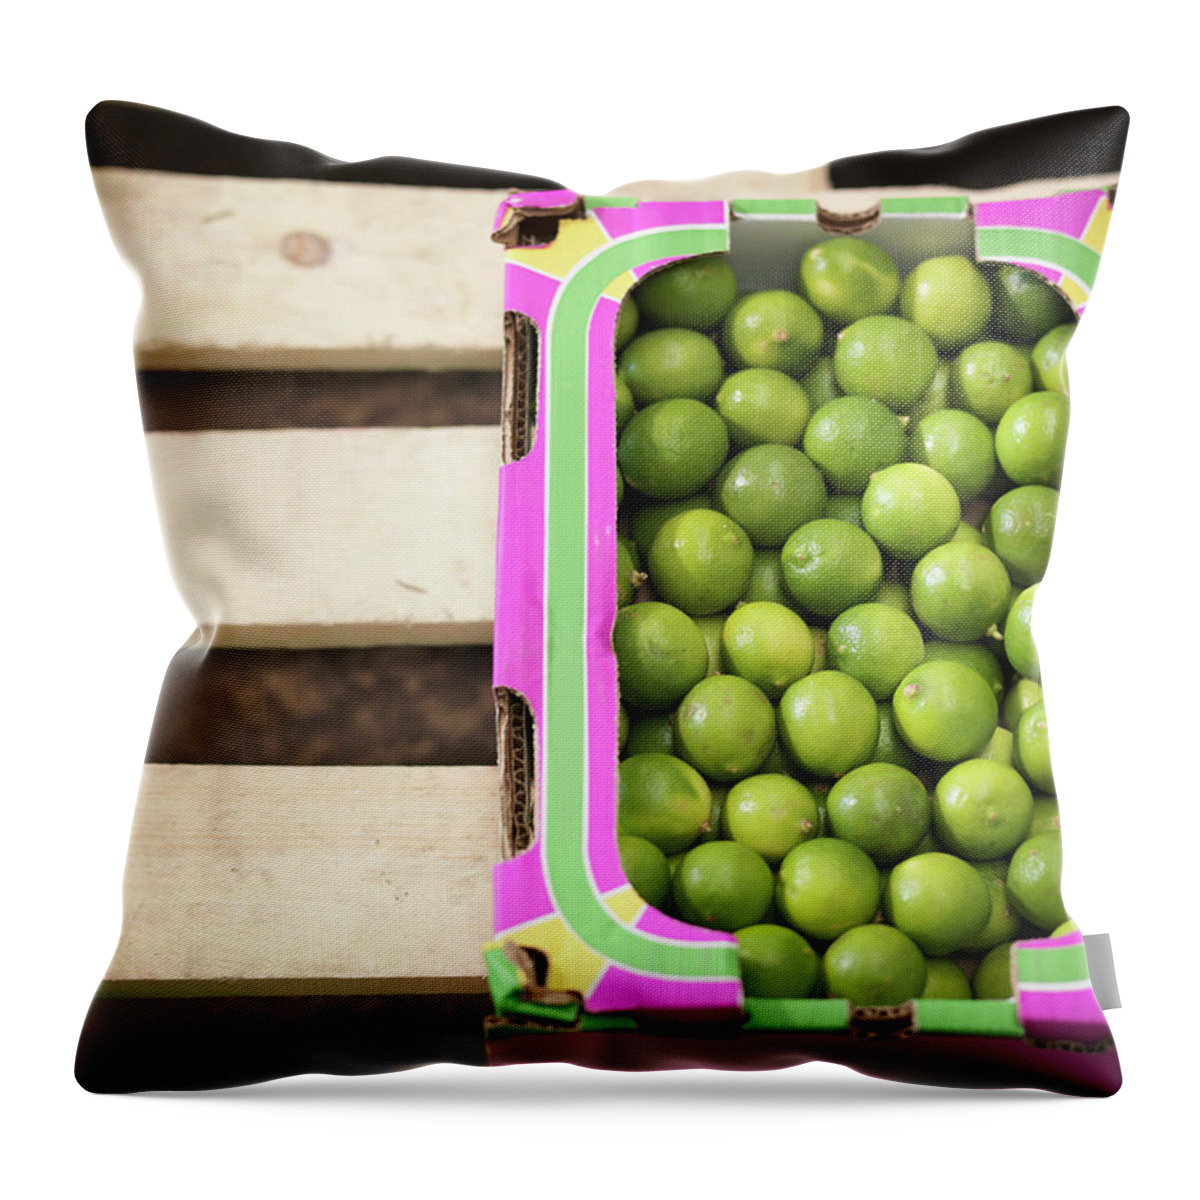 Bradford Throw Pillow featuring the photograph Close Up Of Box Of Limes by Monty Rakusen